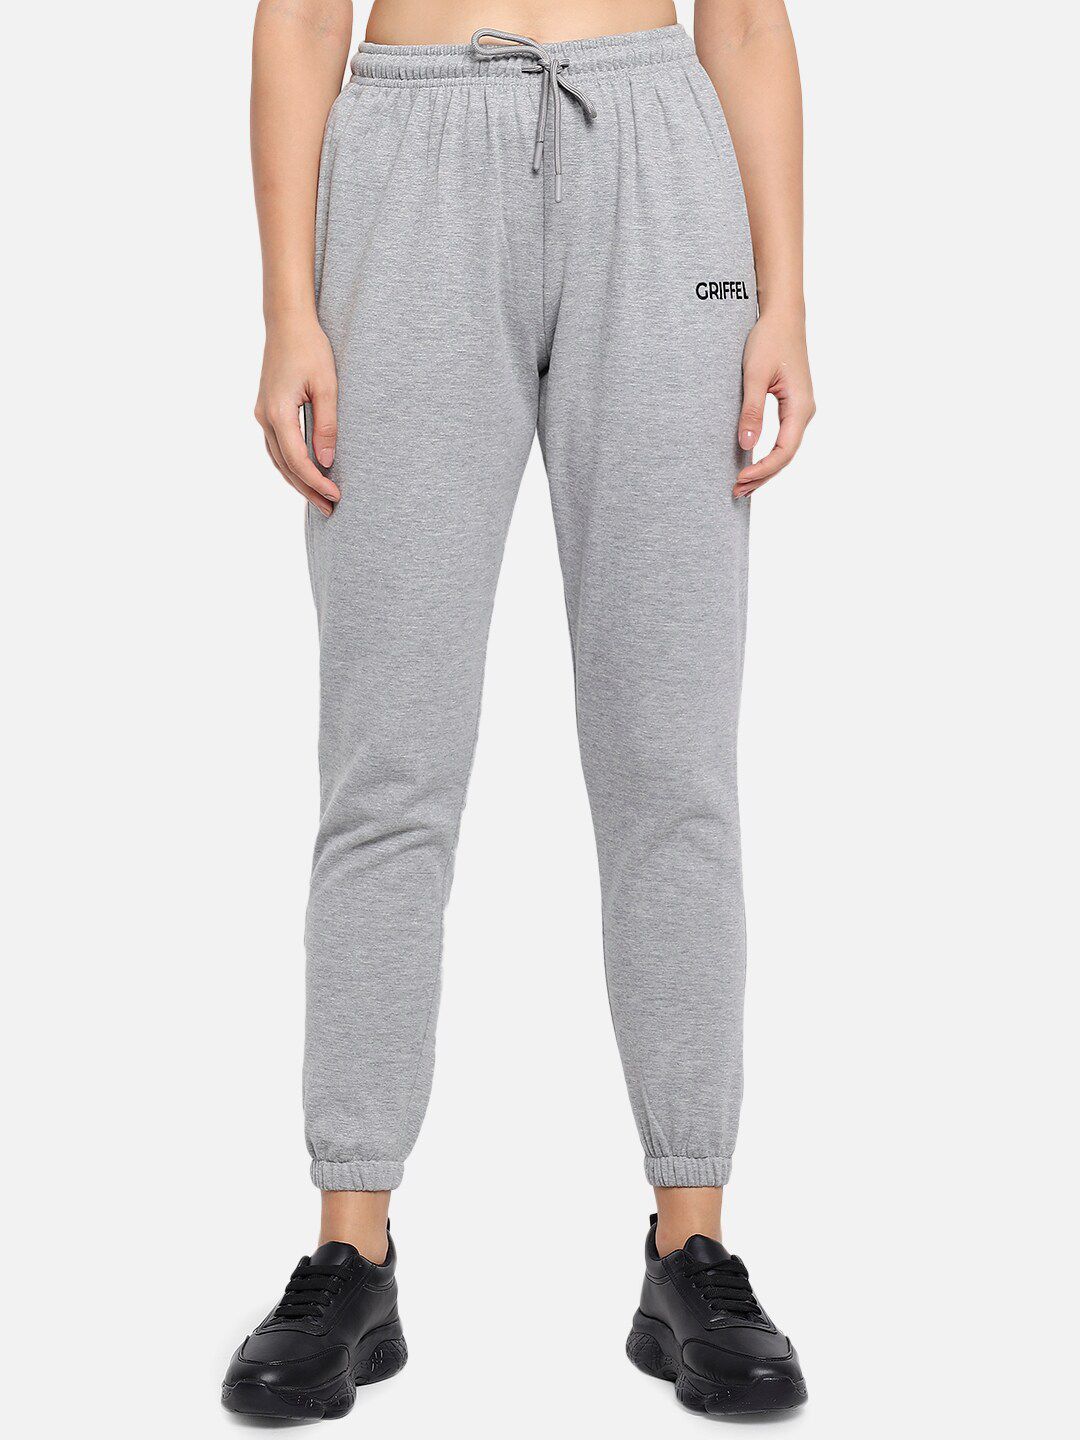 GRIFFEL Women Grey Solid Cotton Track Pant Price in India